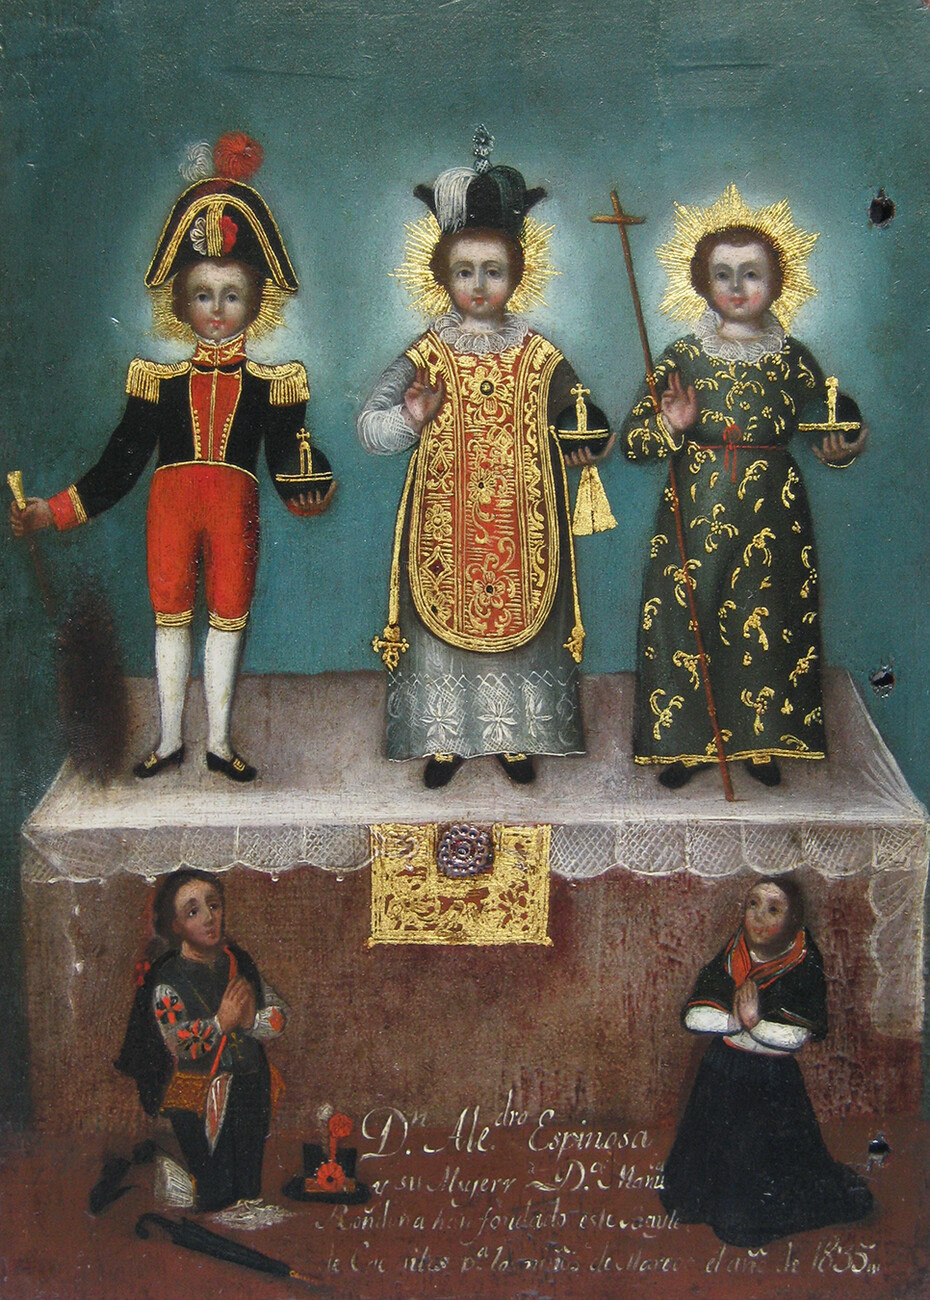 three children on table with different dress. two adults in bottom corners look up at the children